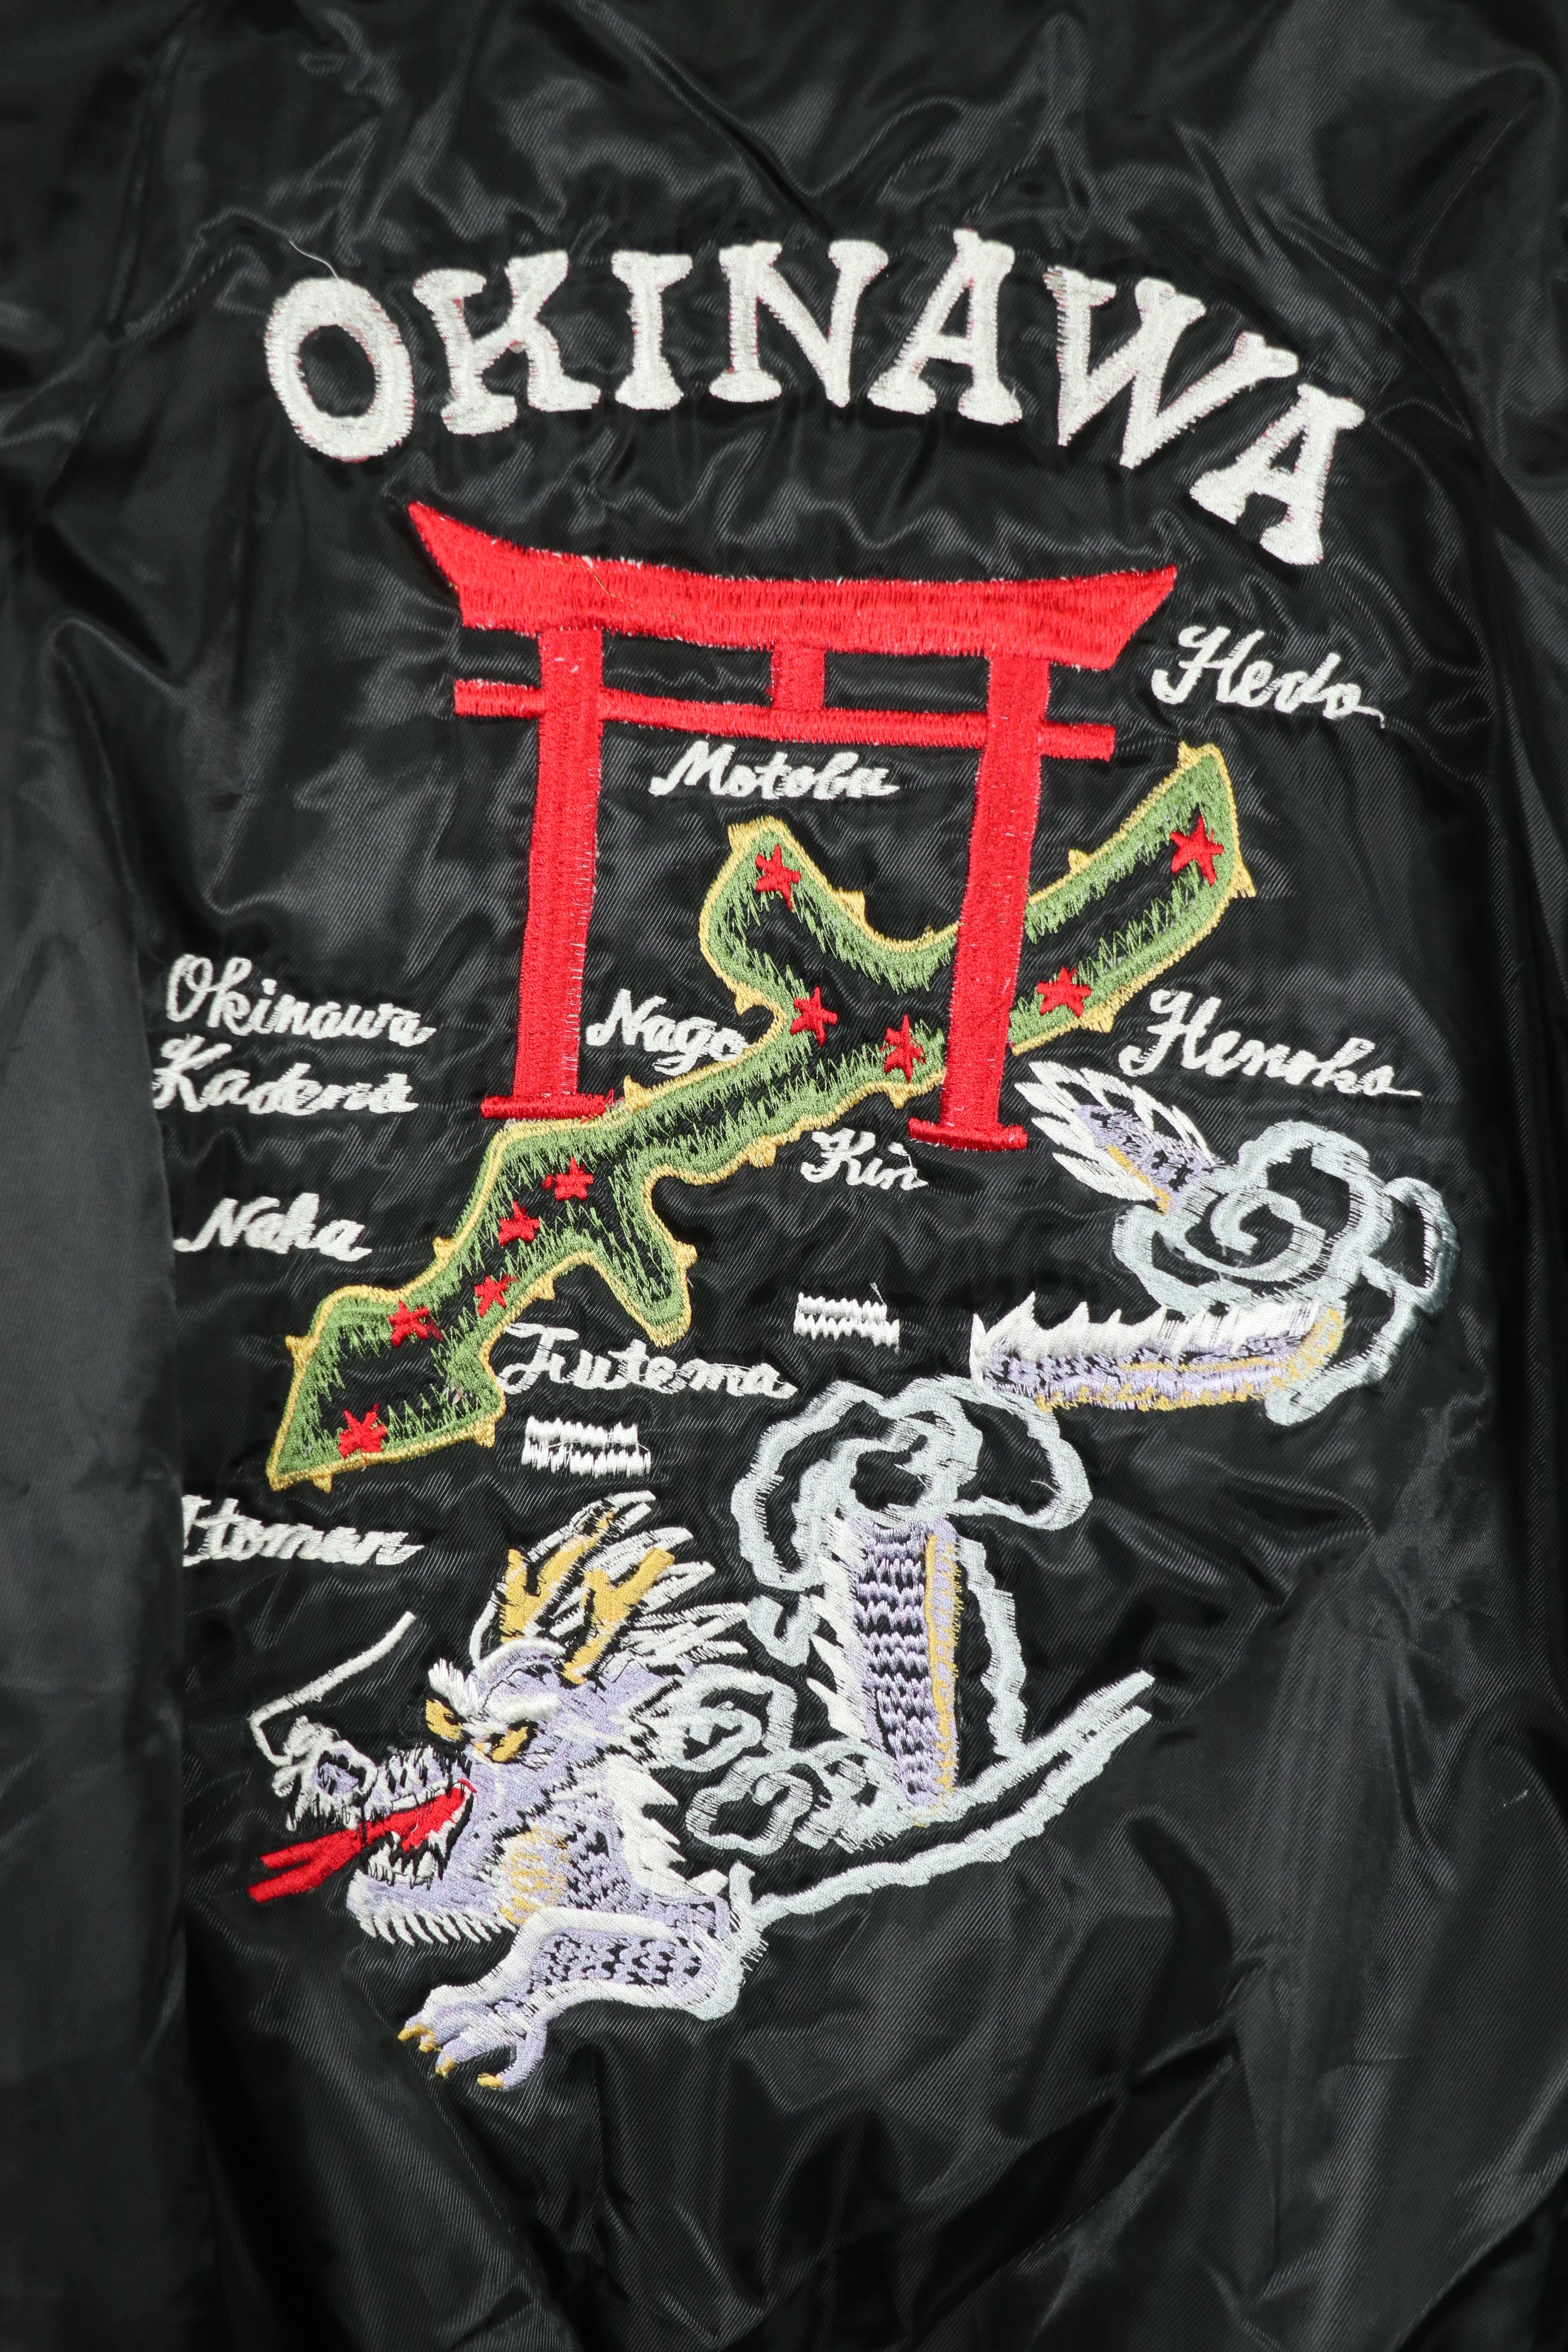 Recent Okinawa made souvenir Jacket directly embroidered MA-1 B